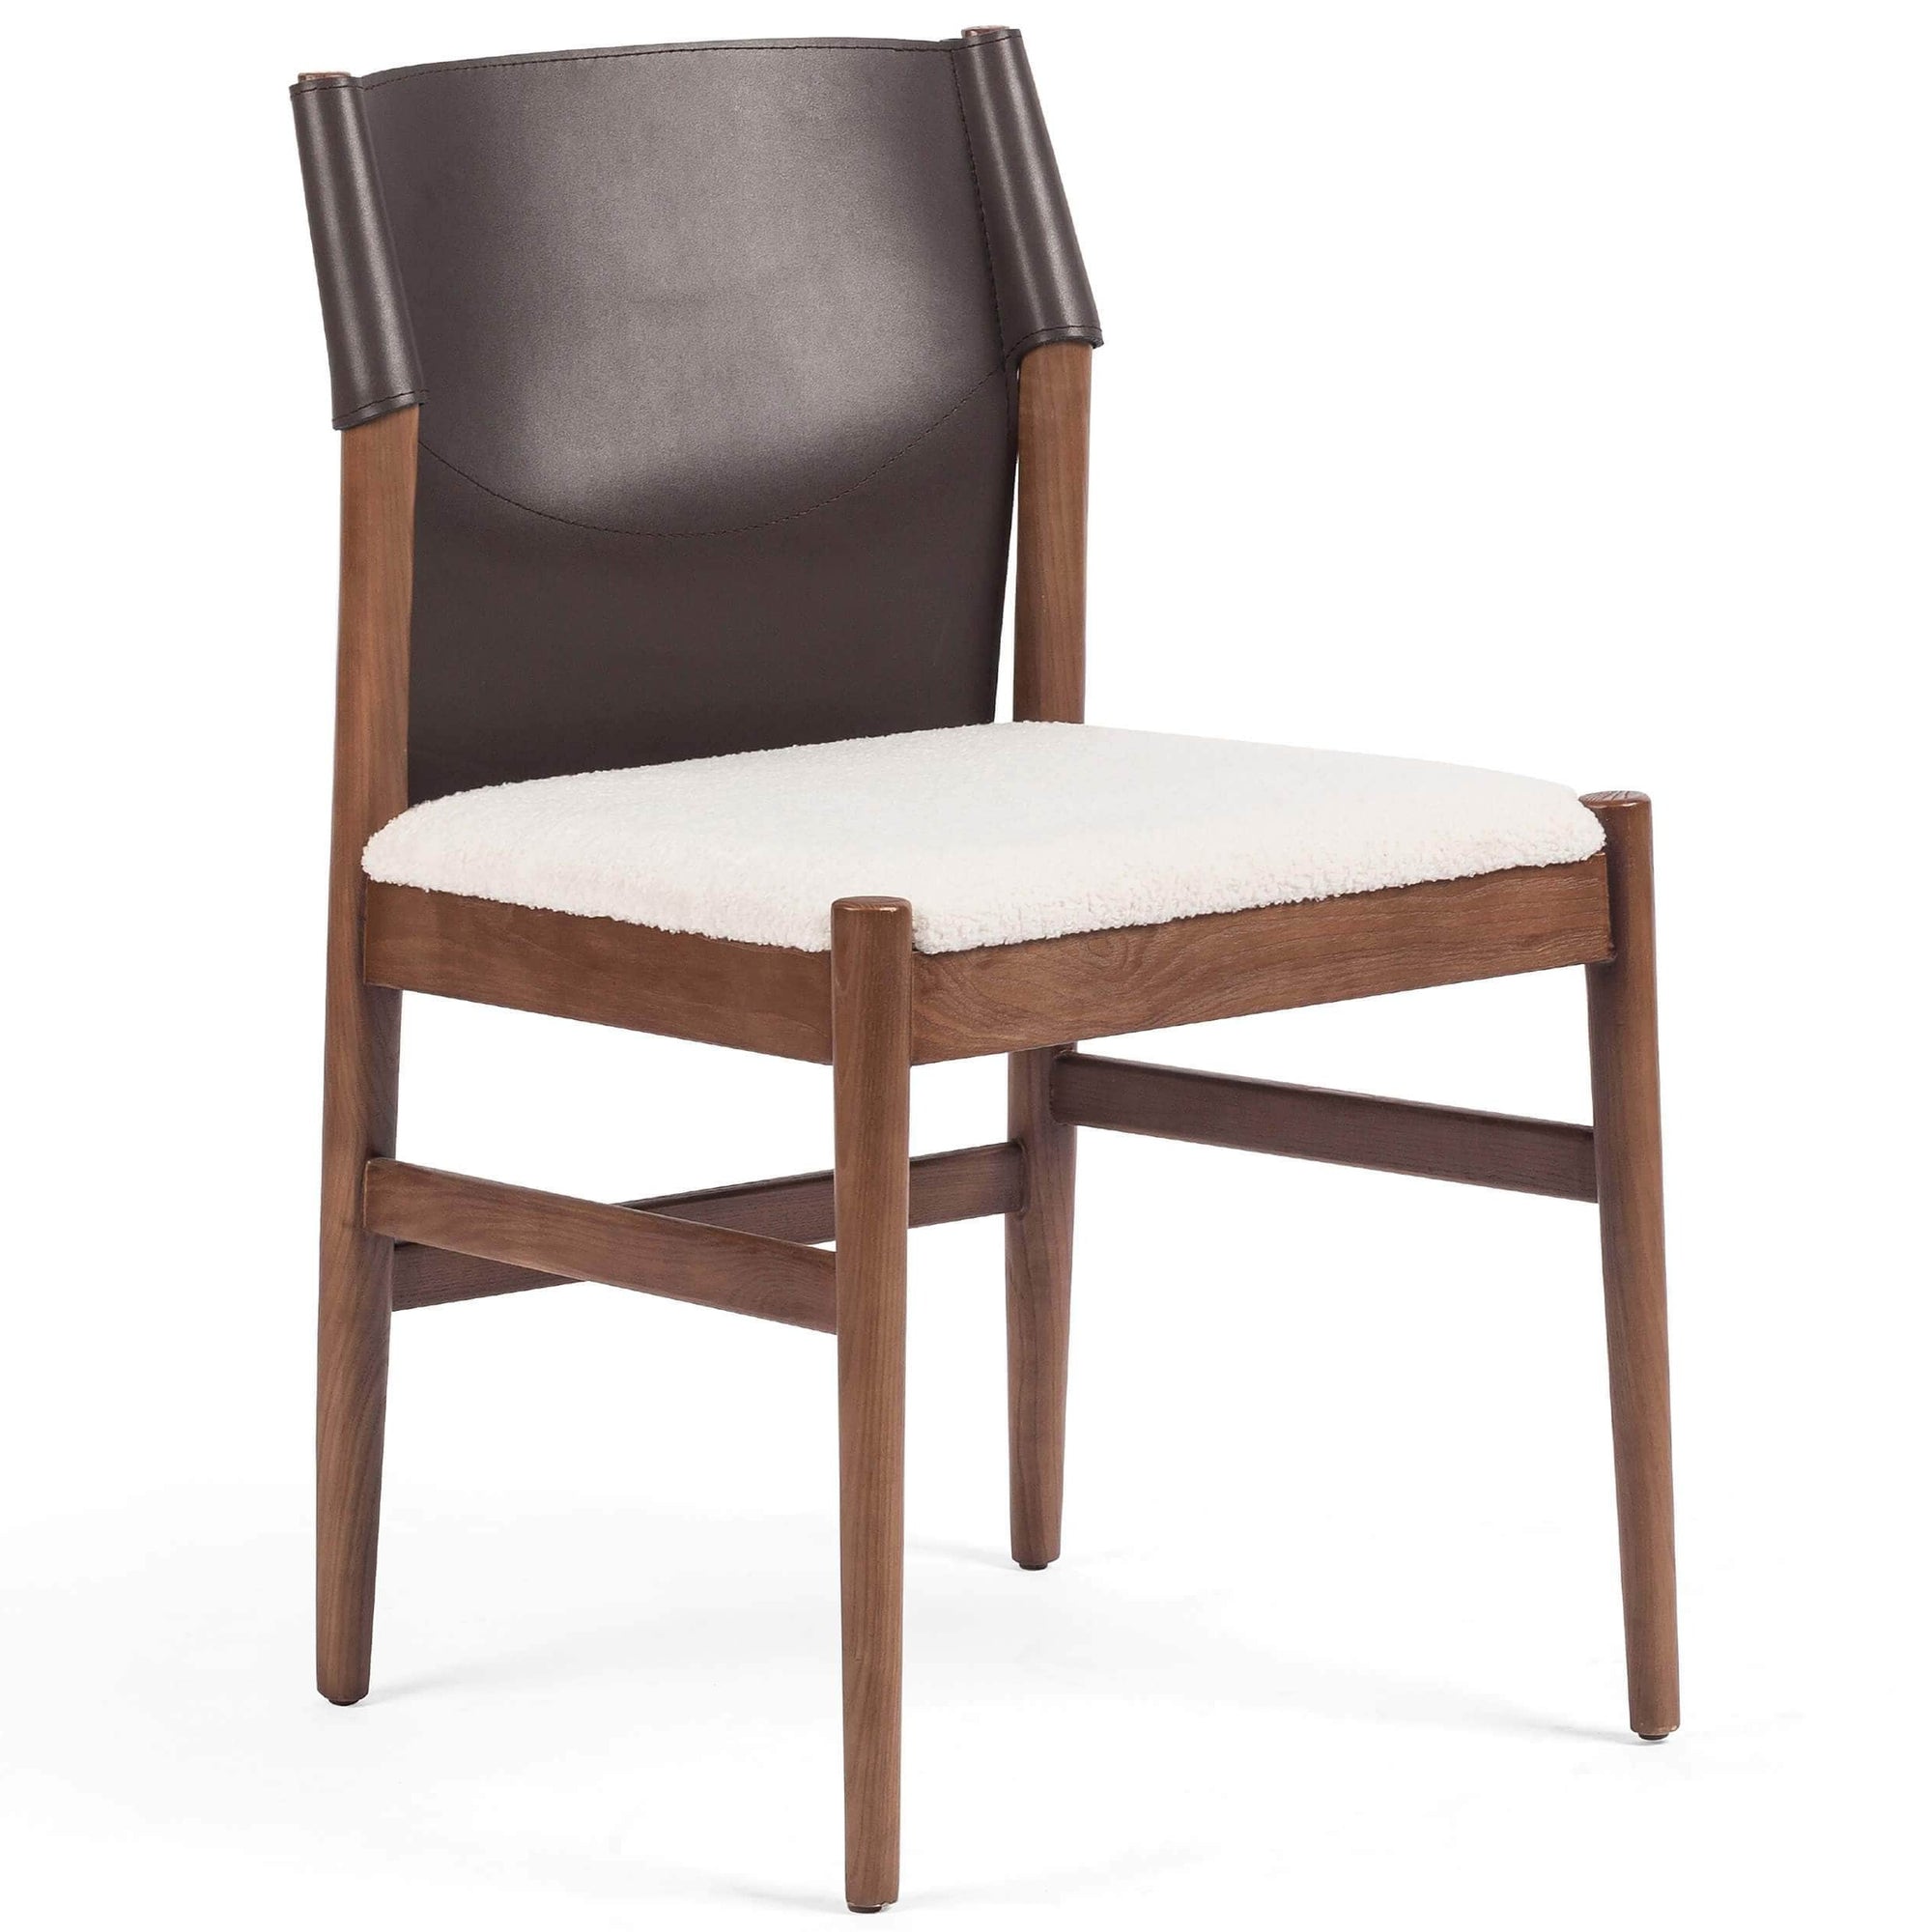 Lulu Armless Dining Chair, Espresso Leather, Set of 2 – High Fashion Home